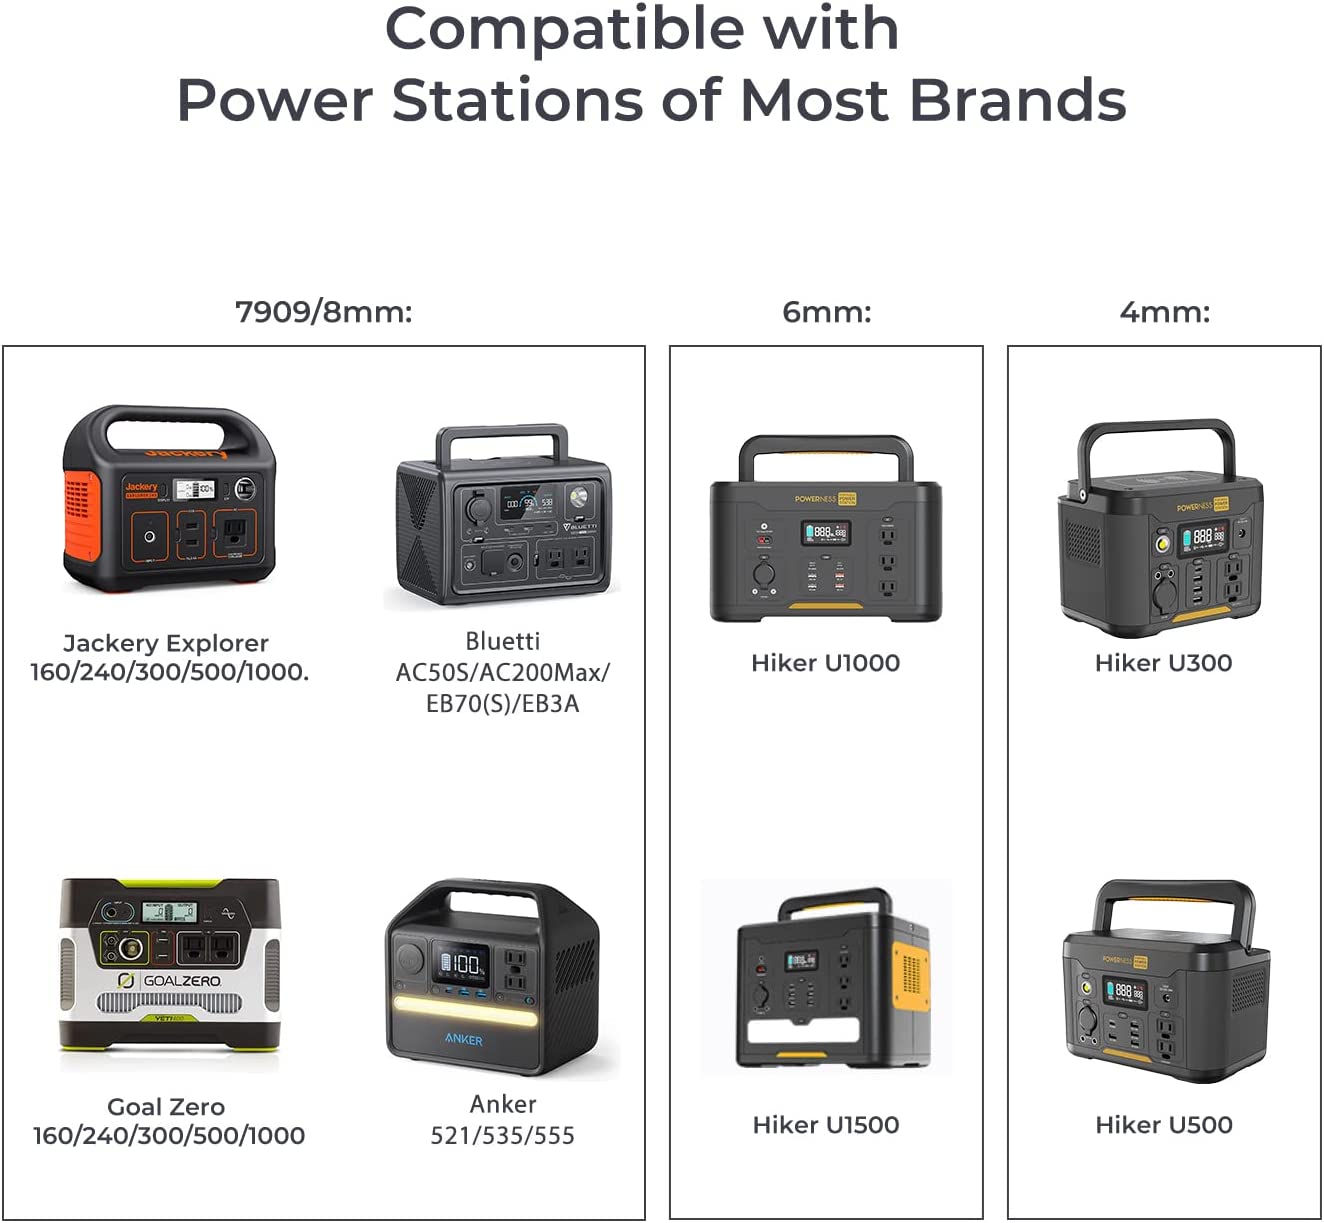 Powerness SolarX S120: Versatile compatibility with various brands demonstrated through three-in-one connection chords. Compatibility chart of Powerness S120